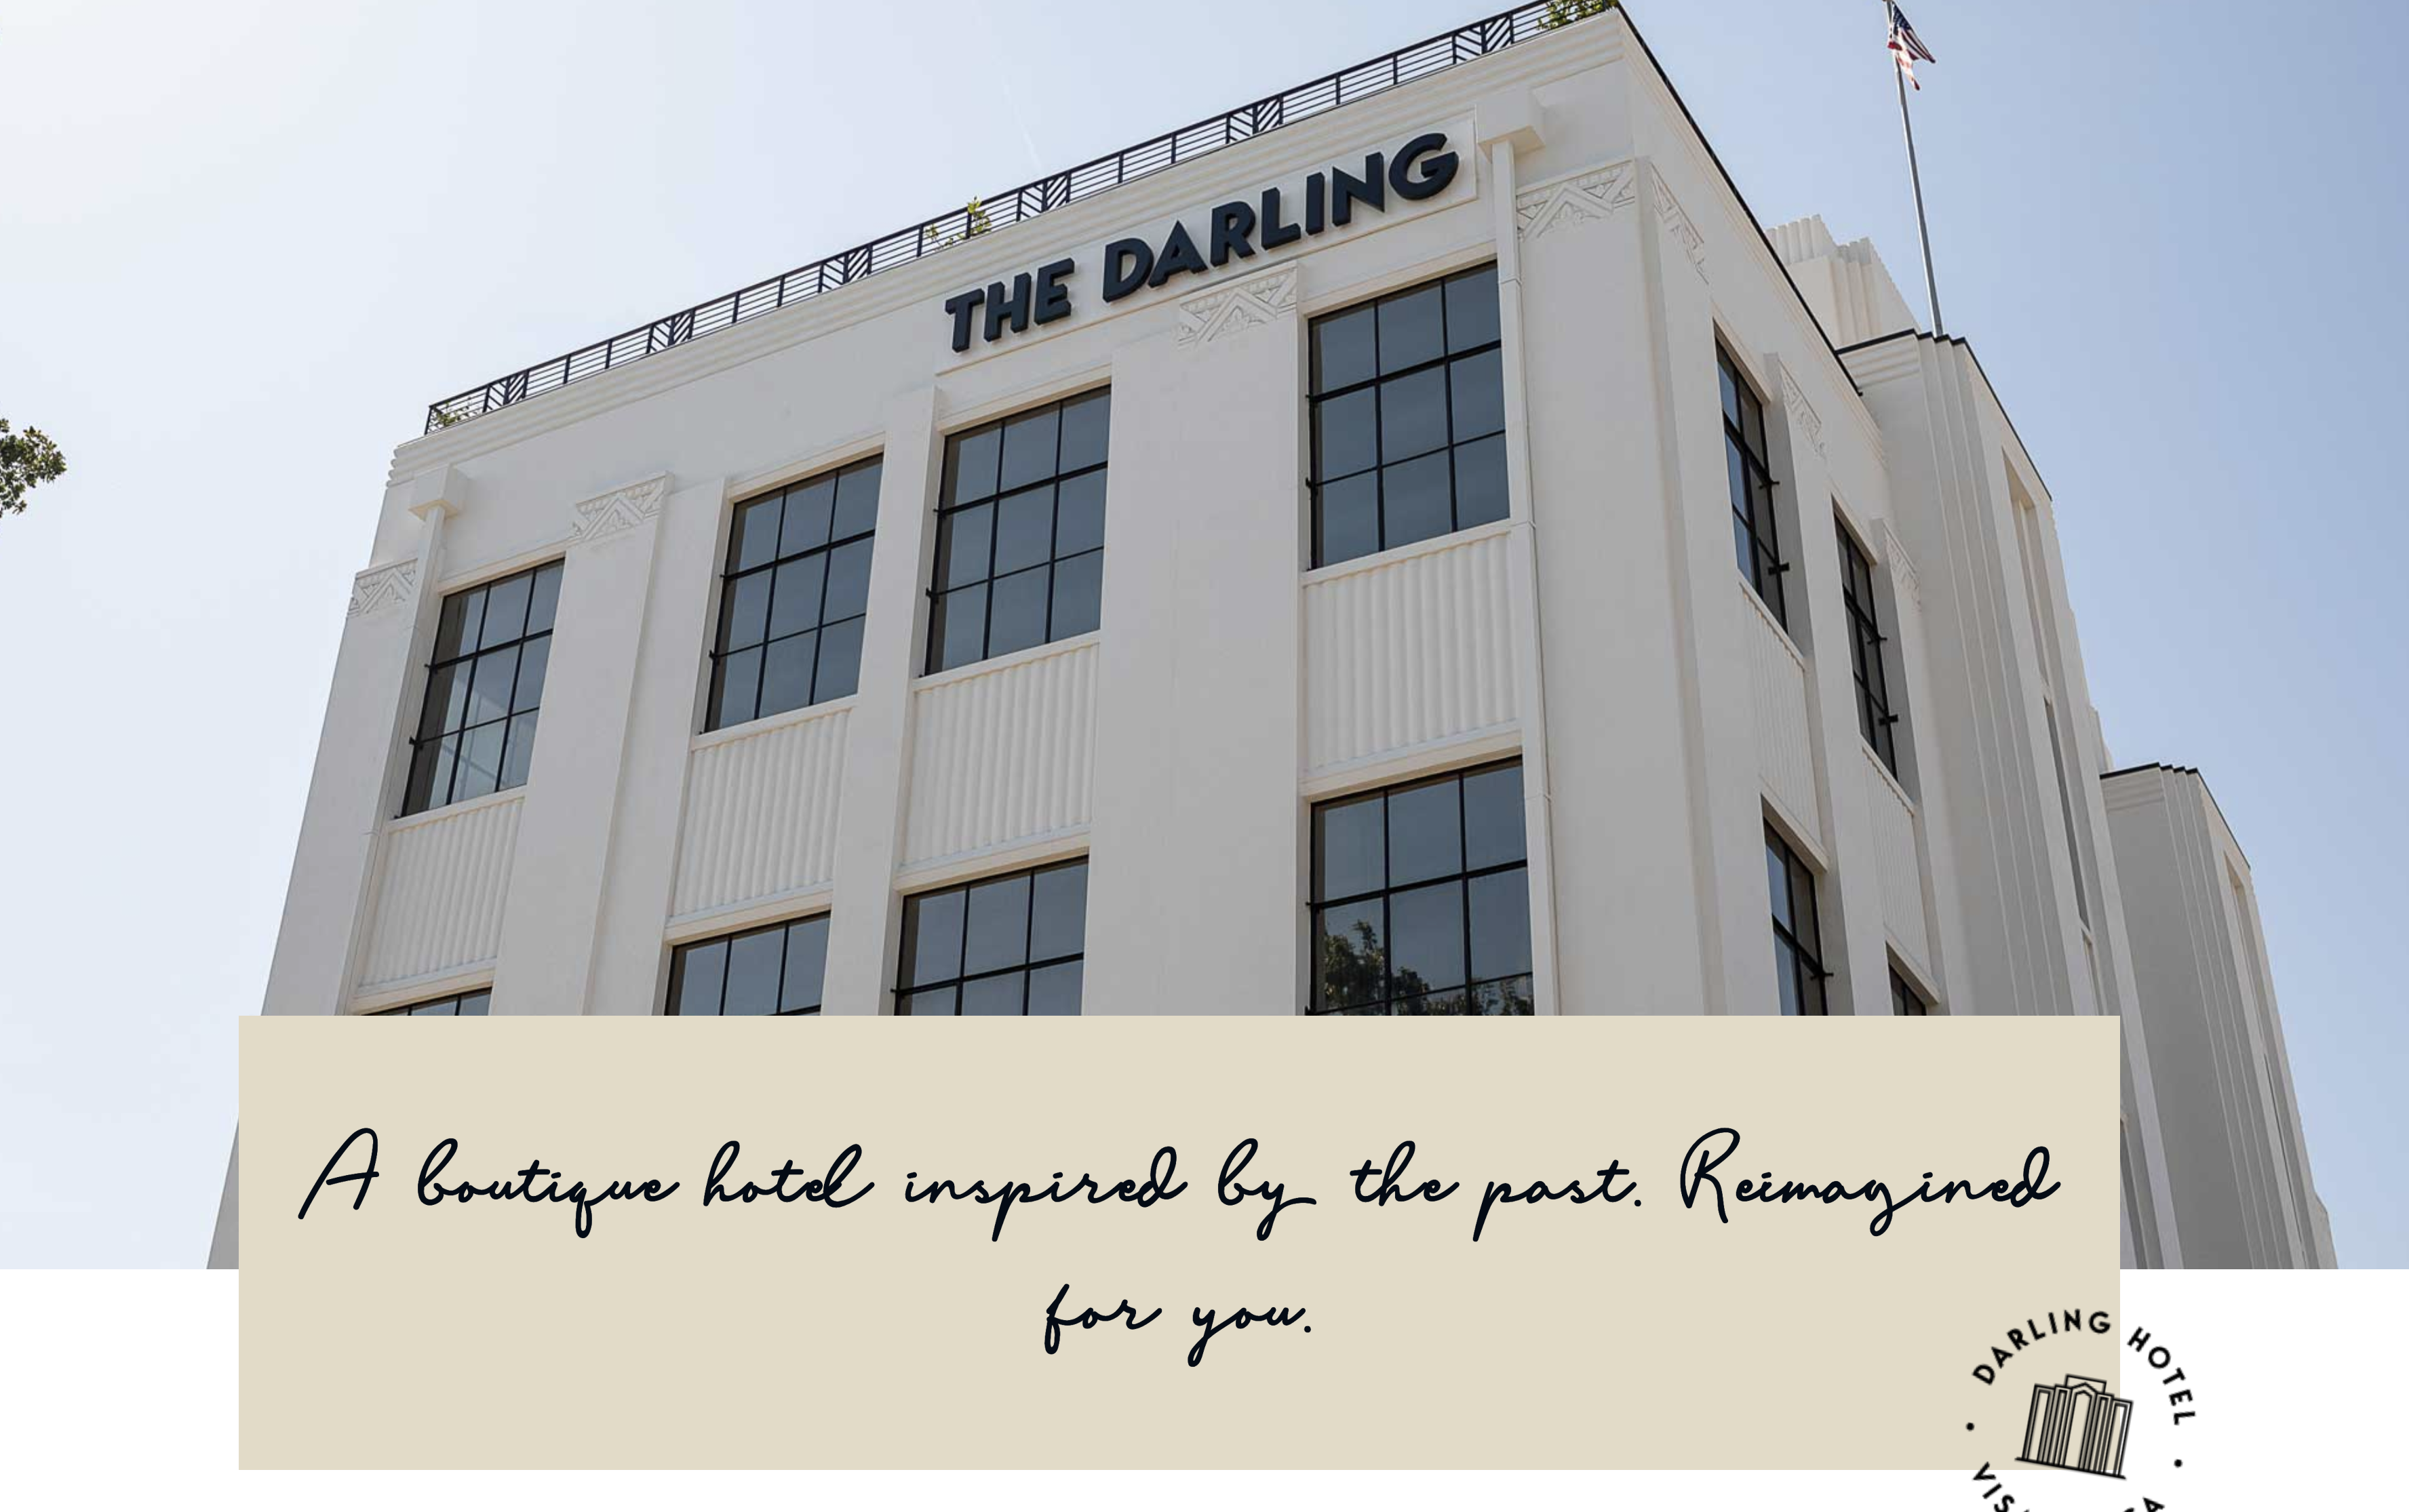 The Darling Hotel